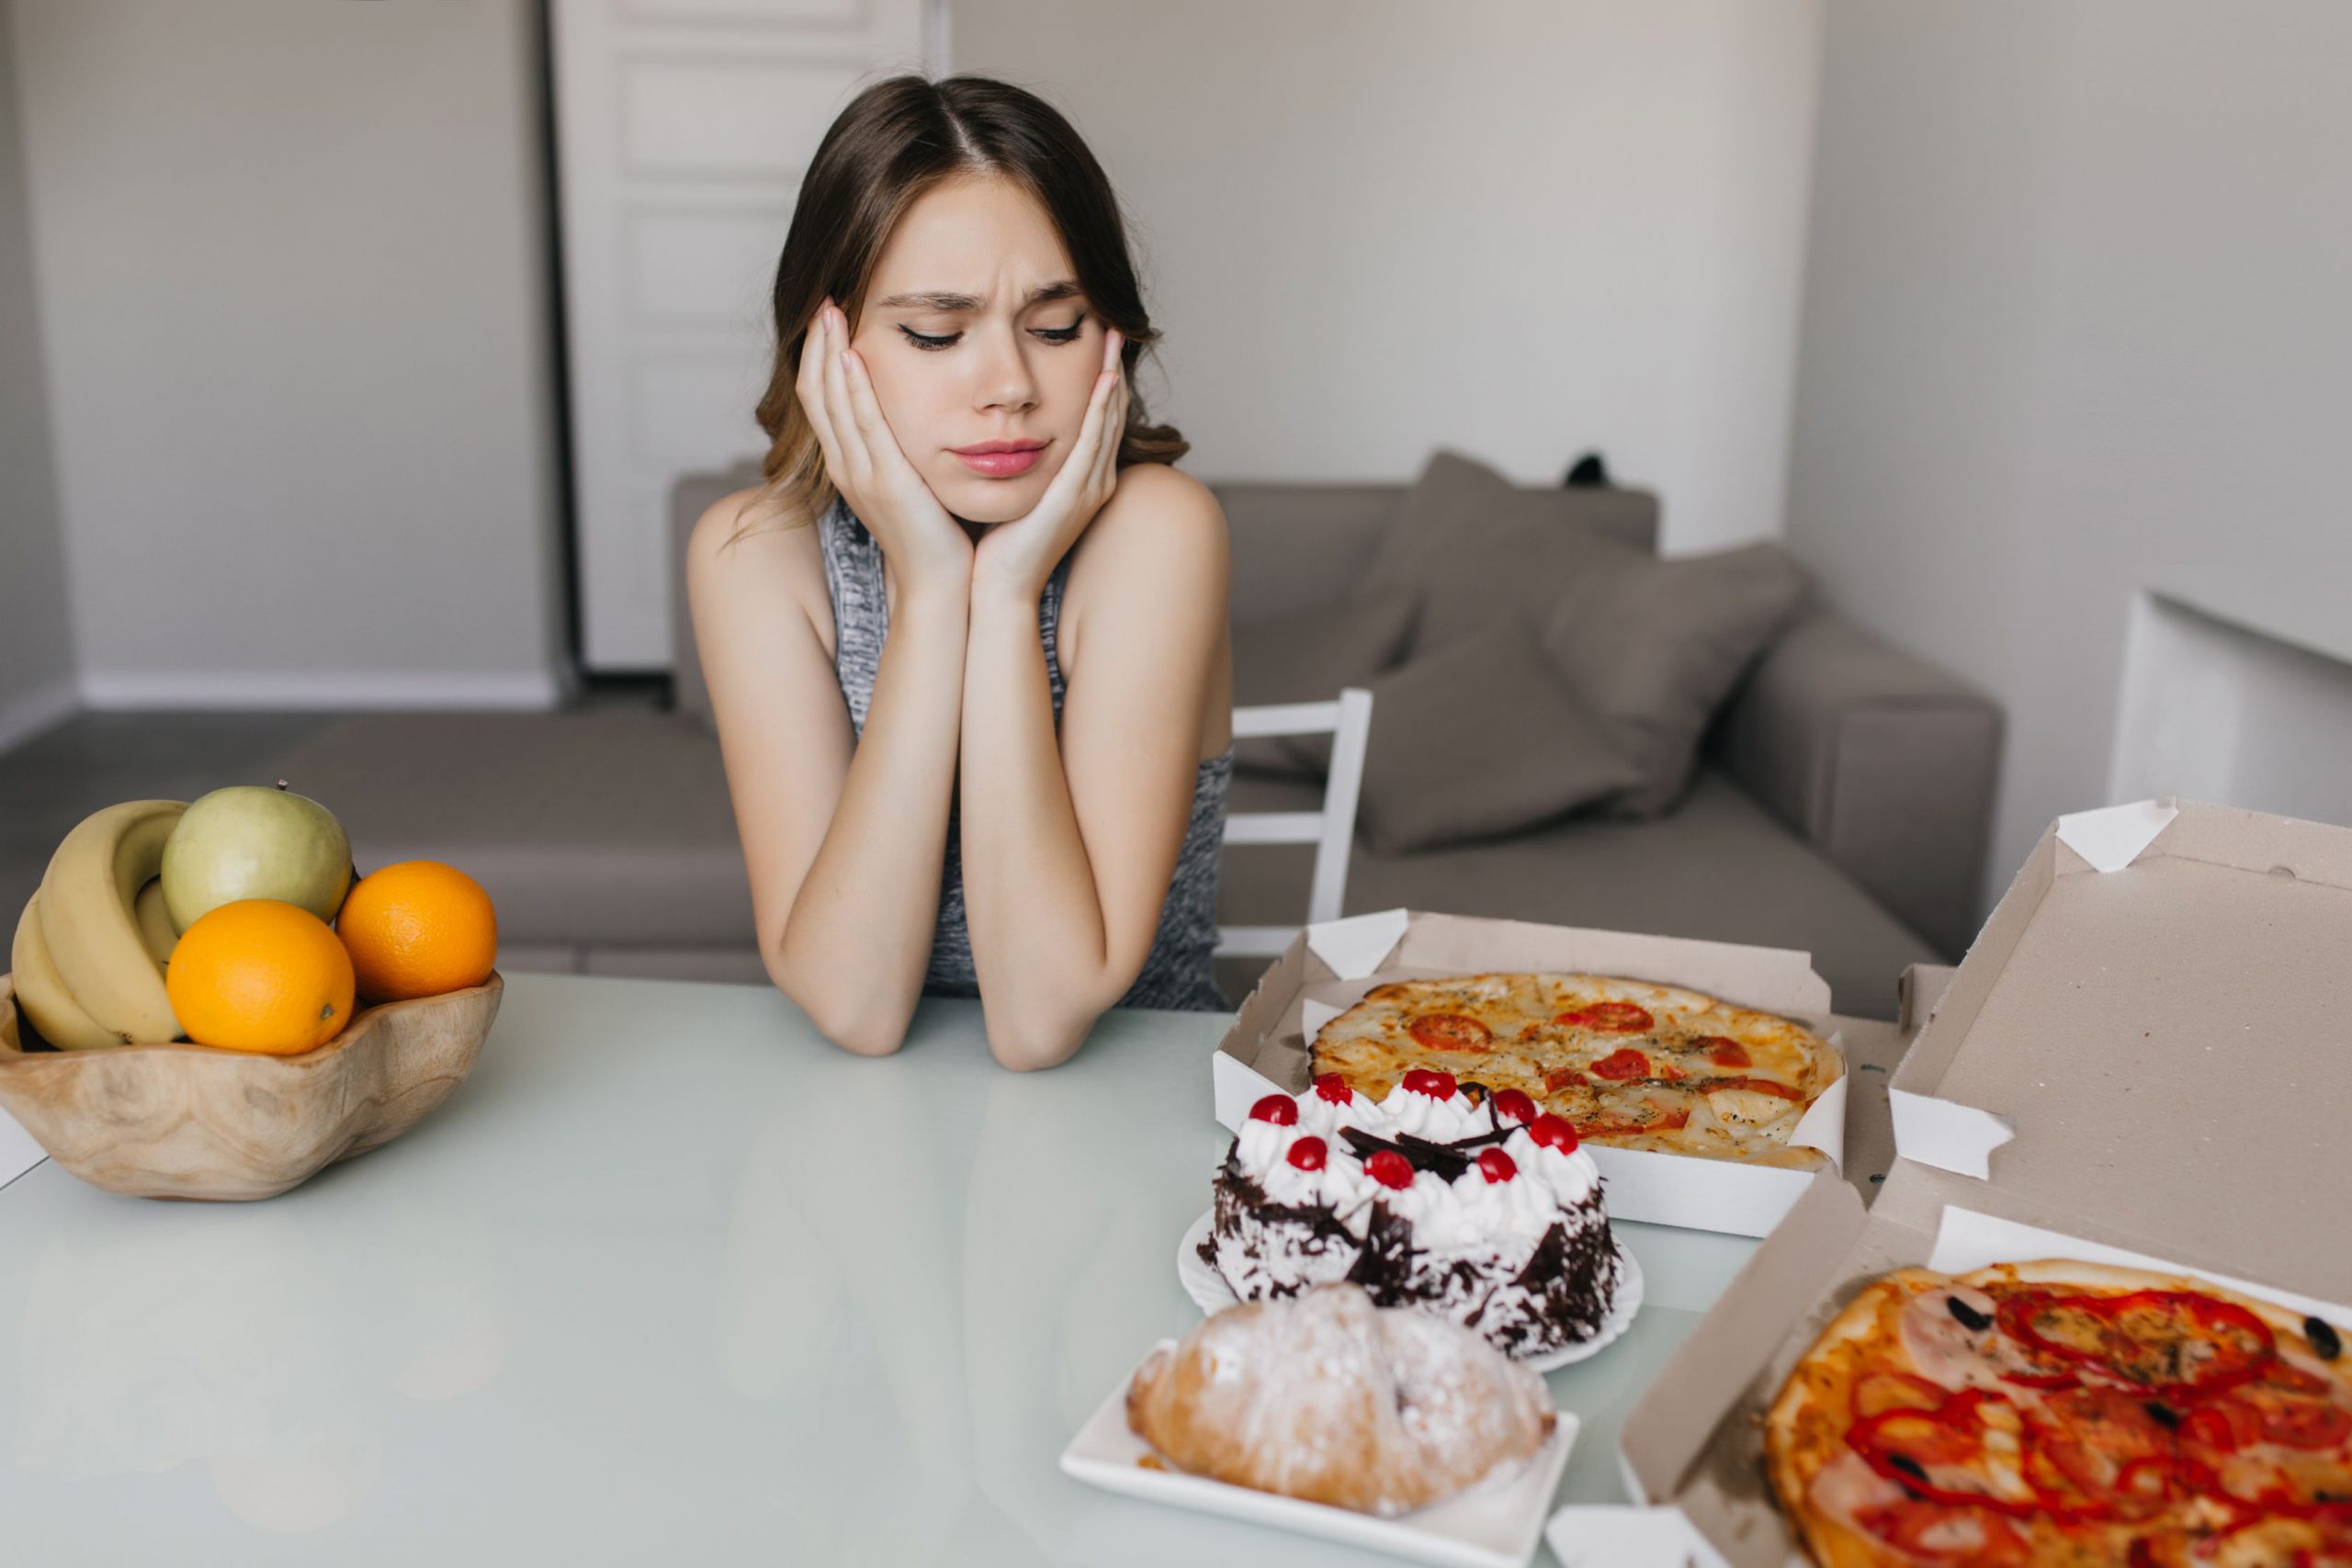 6 Common Types of Eating Disorders (and Their Symptoms)